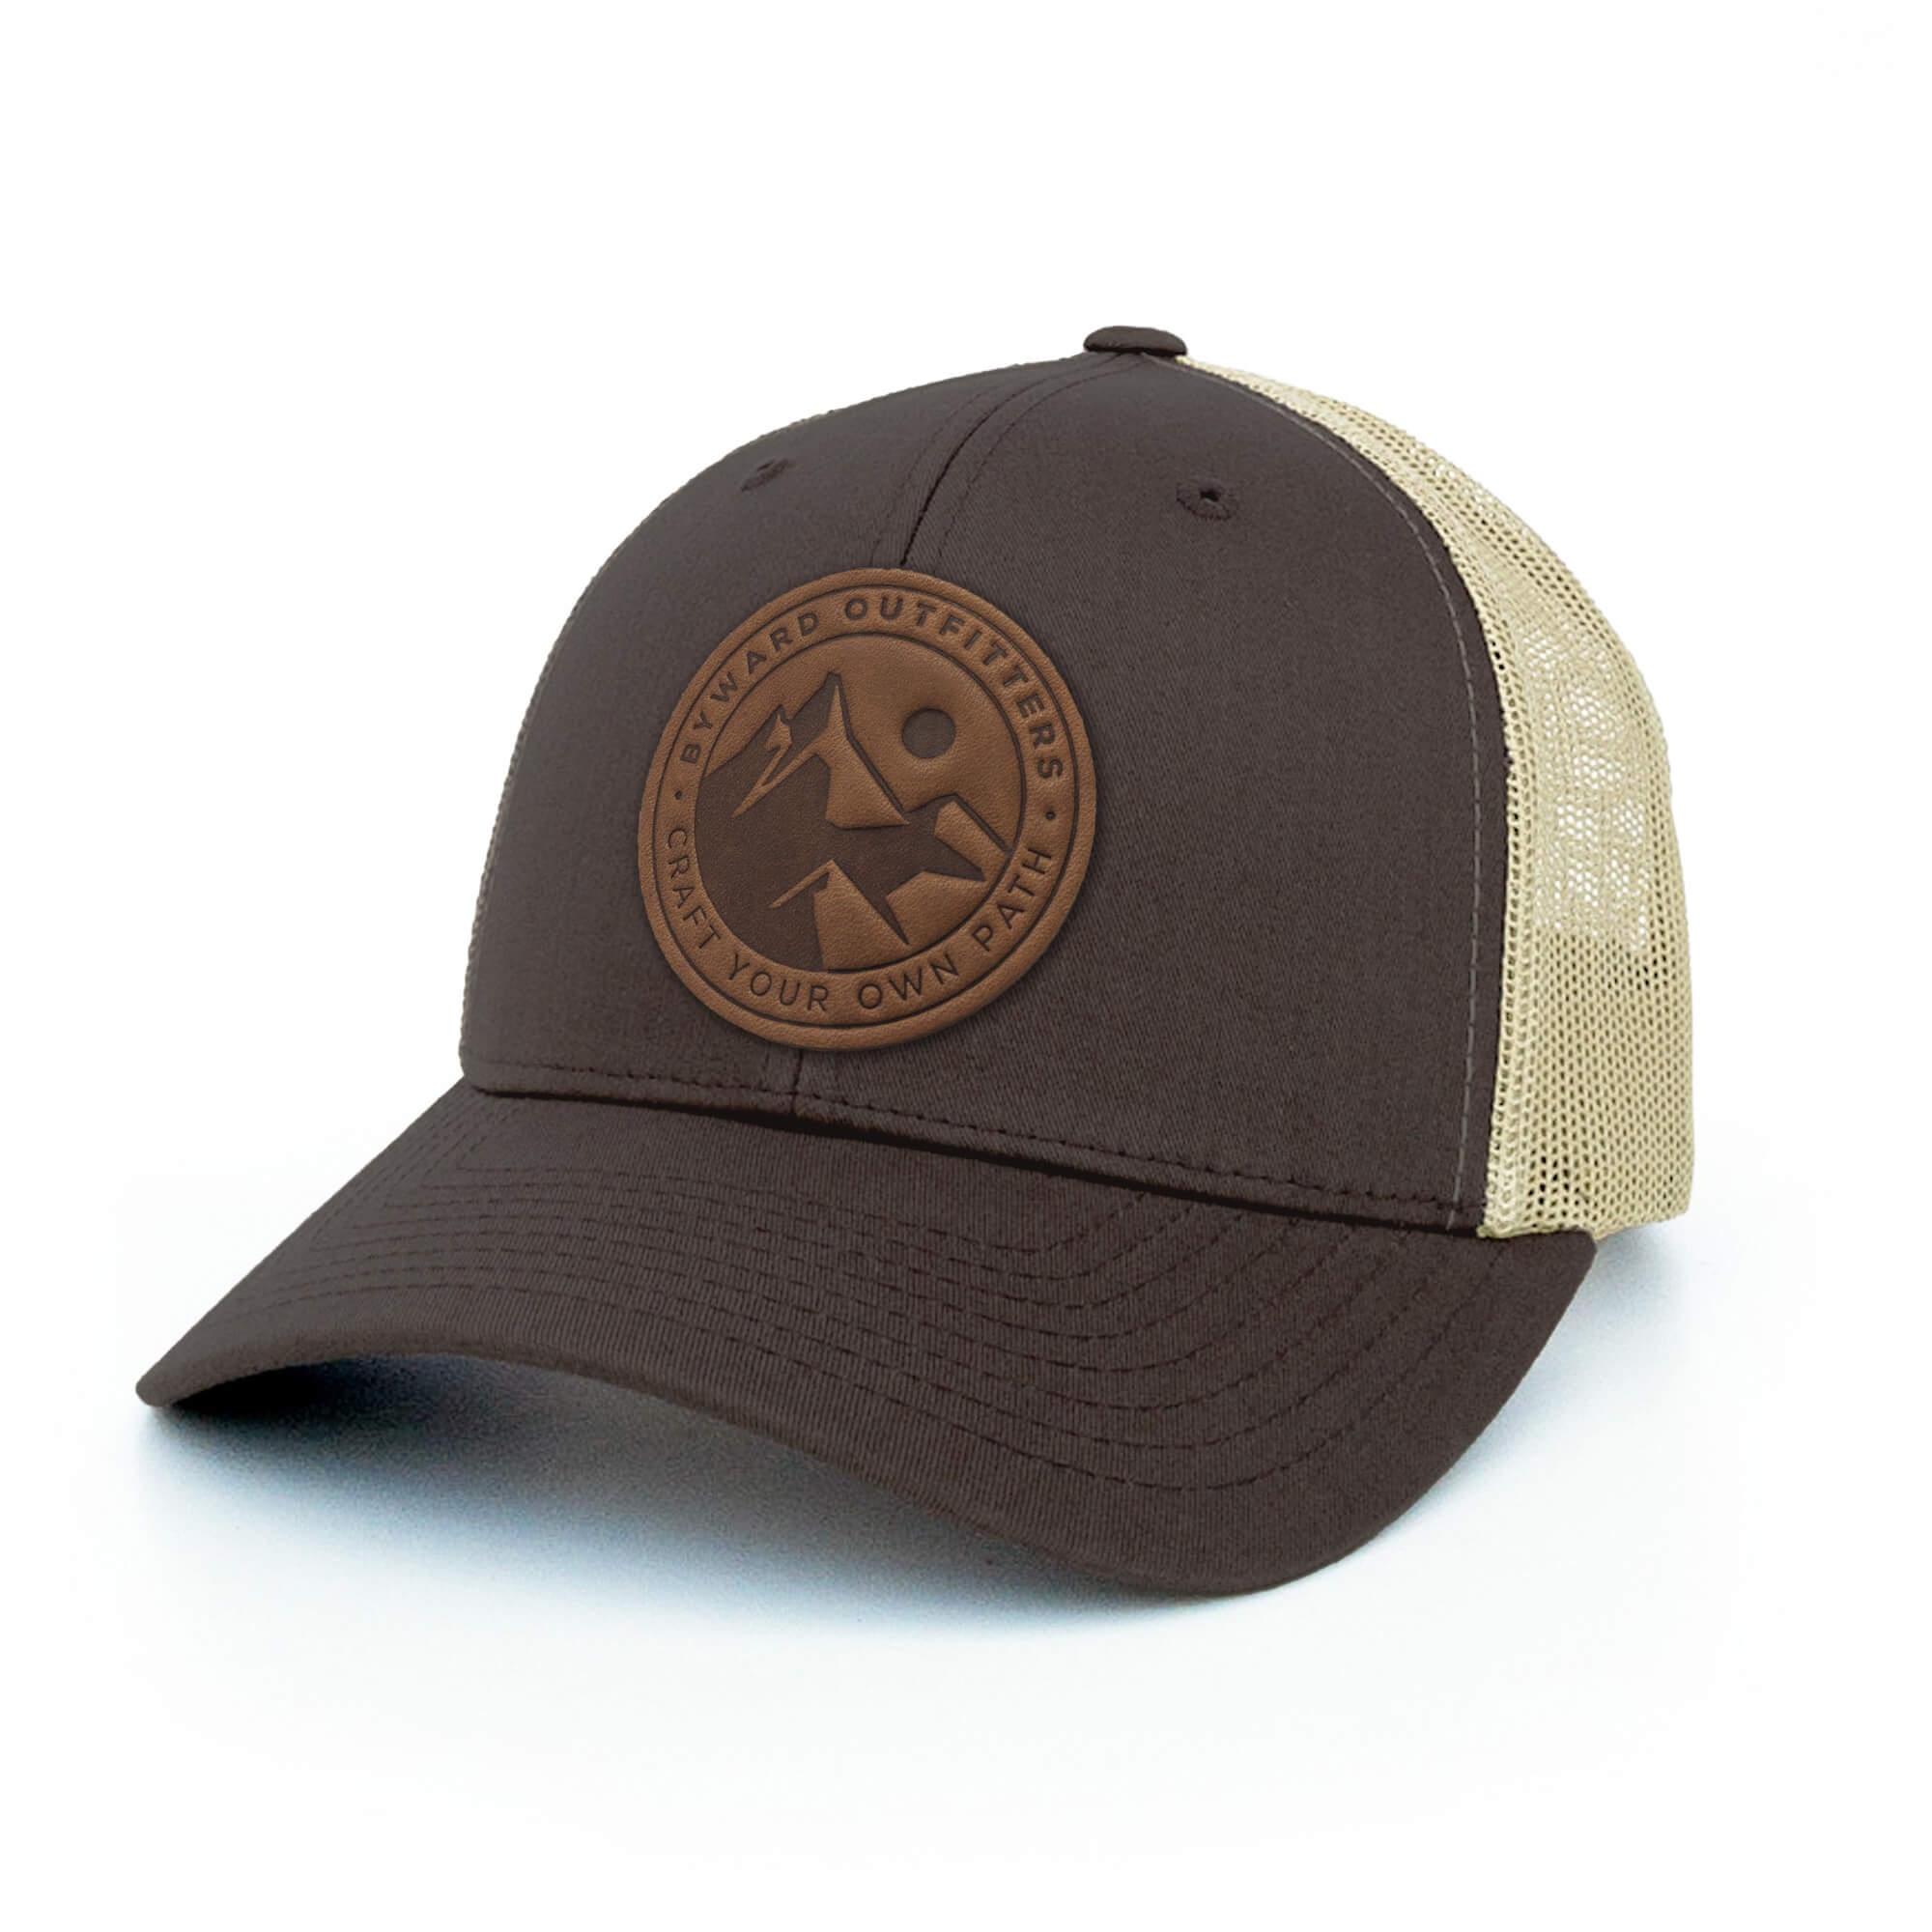 Brown and khaki trucker hat with full-grain leather patch of a Mountain Escape | BLACK-005-005, CHARC-005-005, NAVY-005-005, HGREY-005-005, MOSS-005-005, BROWN-005-005  Edit alt text